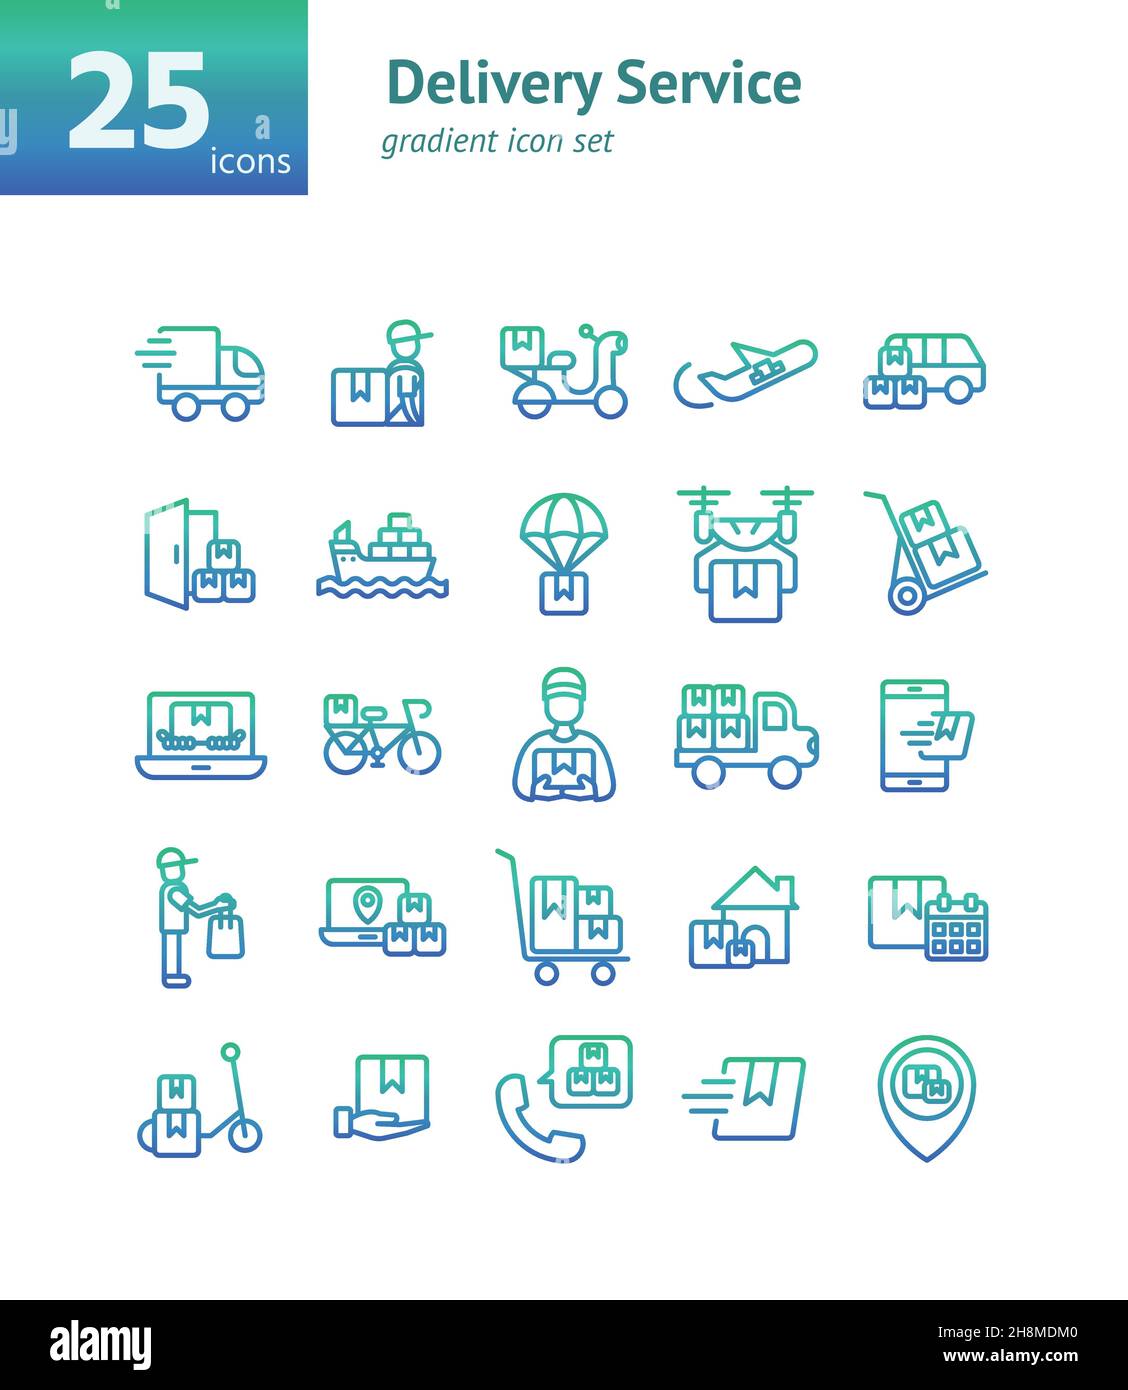 Delivery Service gradient icon set. Vector and Illustration. Stock Vector